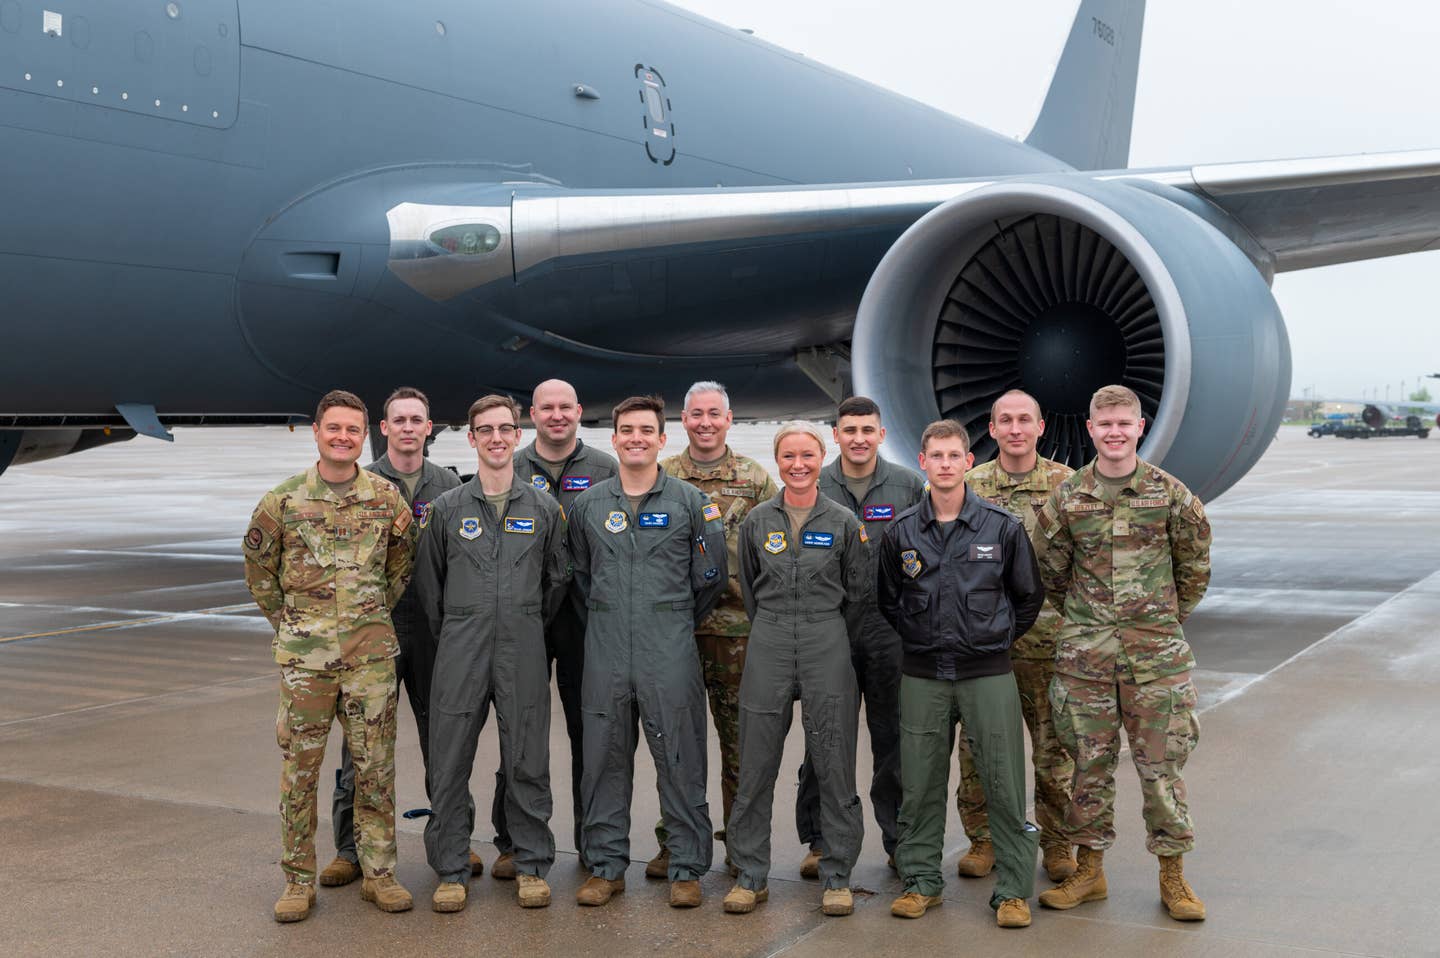 The aircrew from the 22nd Air Refueling Wing’s 24-hour flight pose for a group photo May 5, 2022 at McConnell Air Force Base, Kansas. The aircrew took a group photo before embarking on a 24-hour sortie in a KC-46A Pegasus, completing the Air Mobility Command’s longest flight. <em>U.S. Air Force photo by Airman Brenden Beezley.</em>